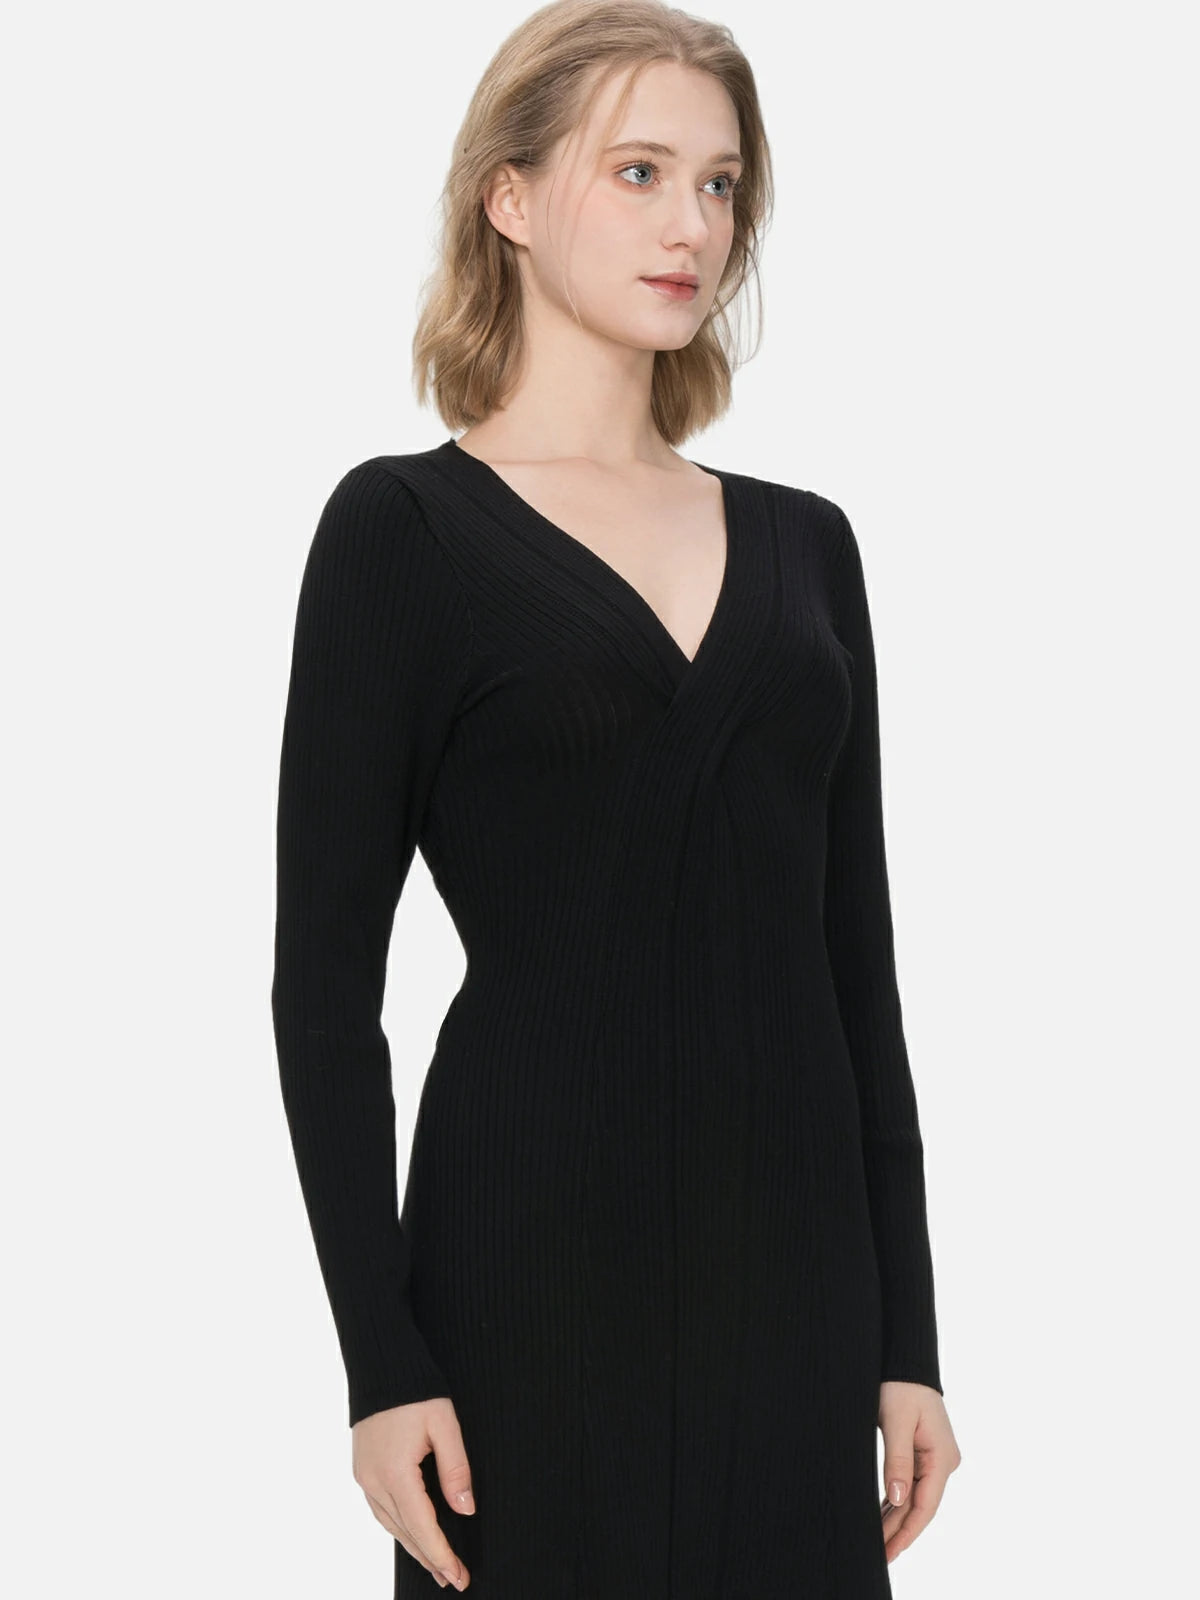 Make a statement in this classic black midi dress with a cross V-neck design, embracing a body-hugging silhouette and intricate knit detailsl.